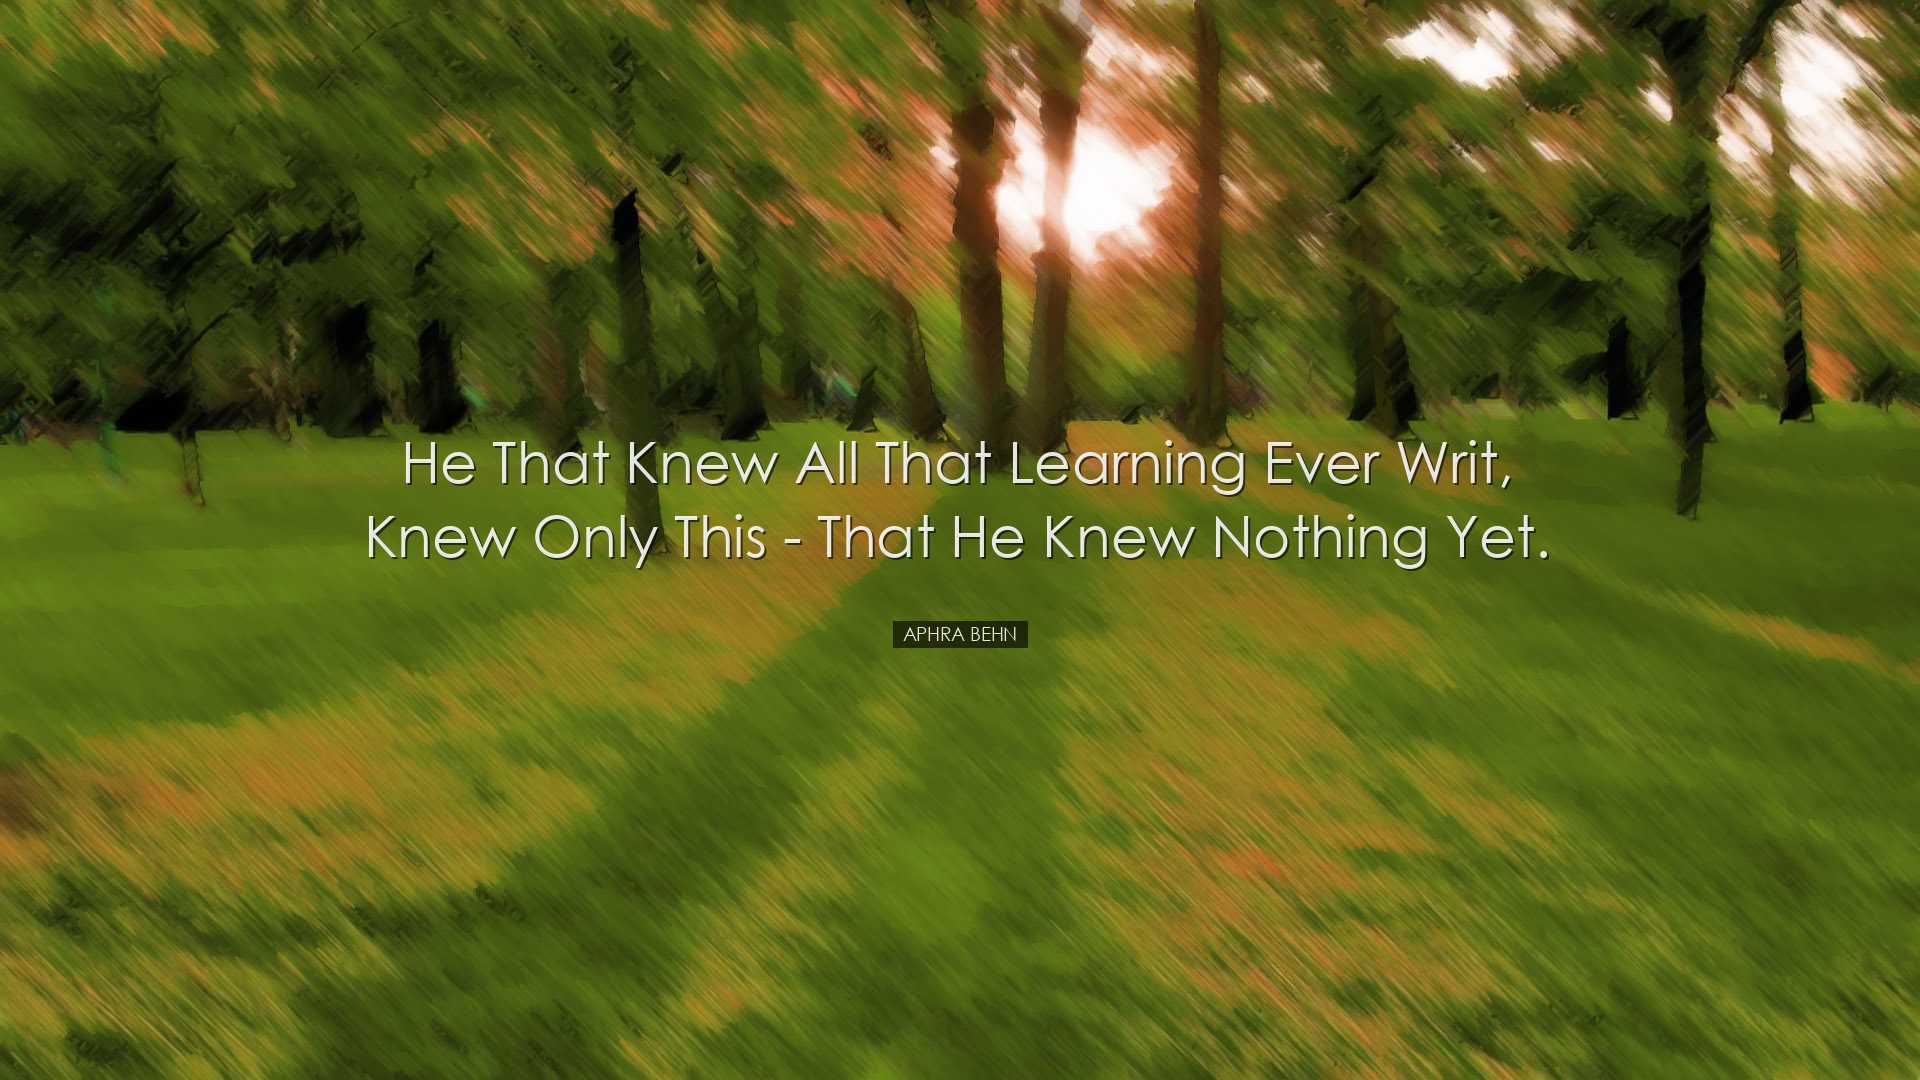 He that knew all that learning ever writ, Knew only this - that he